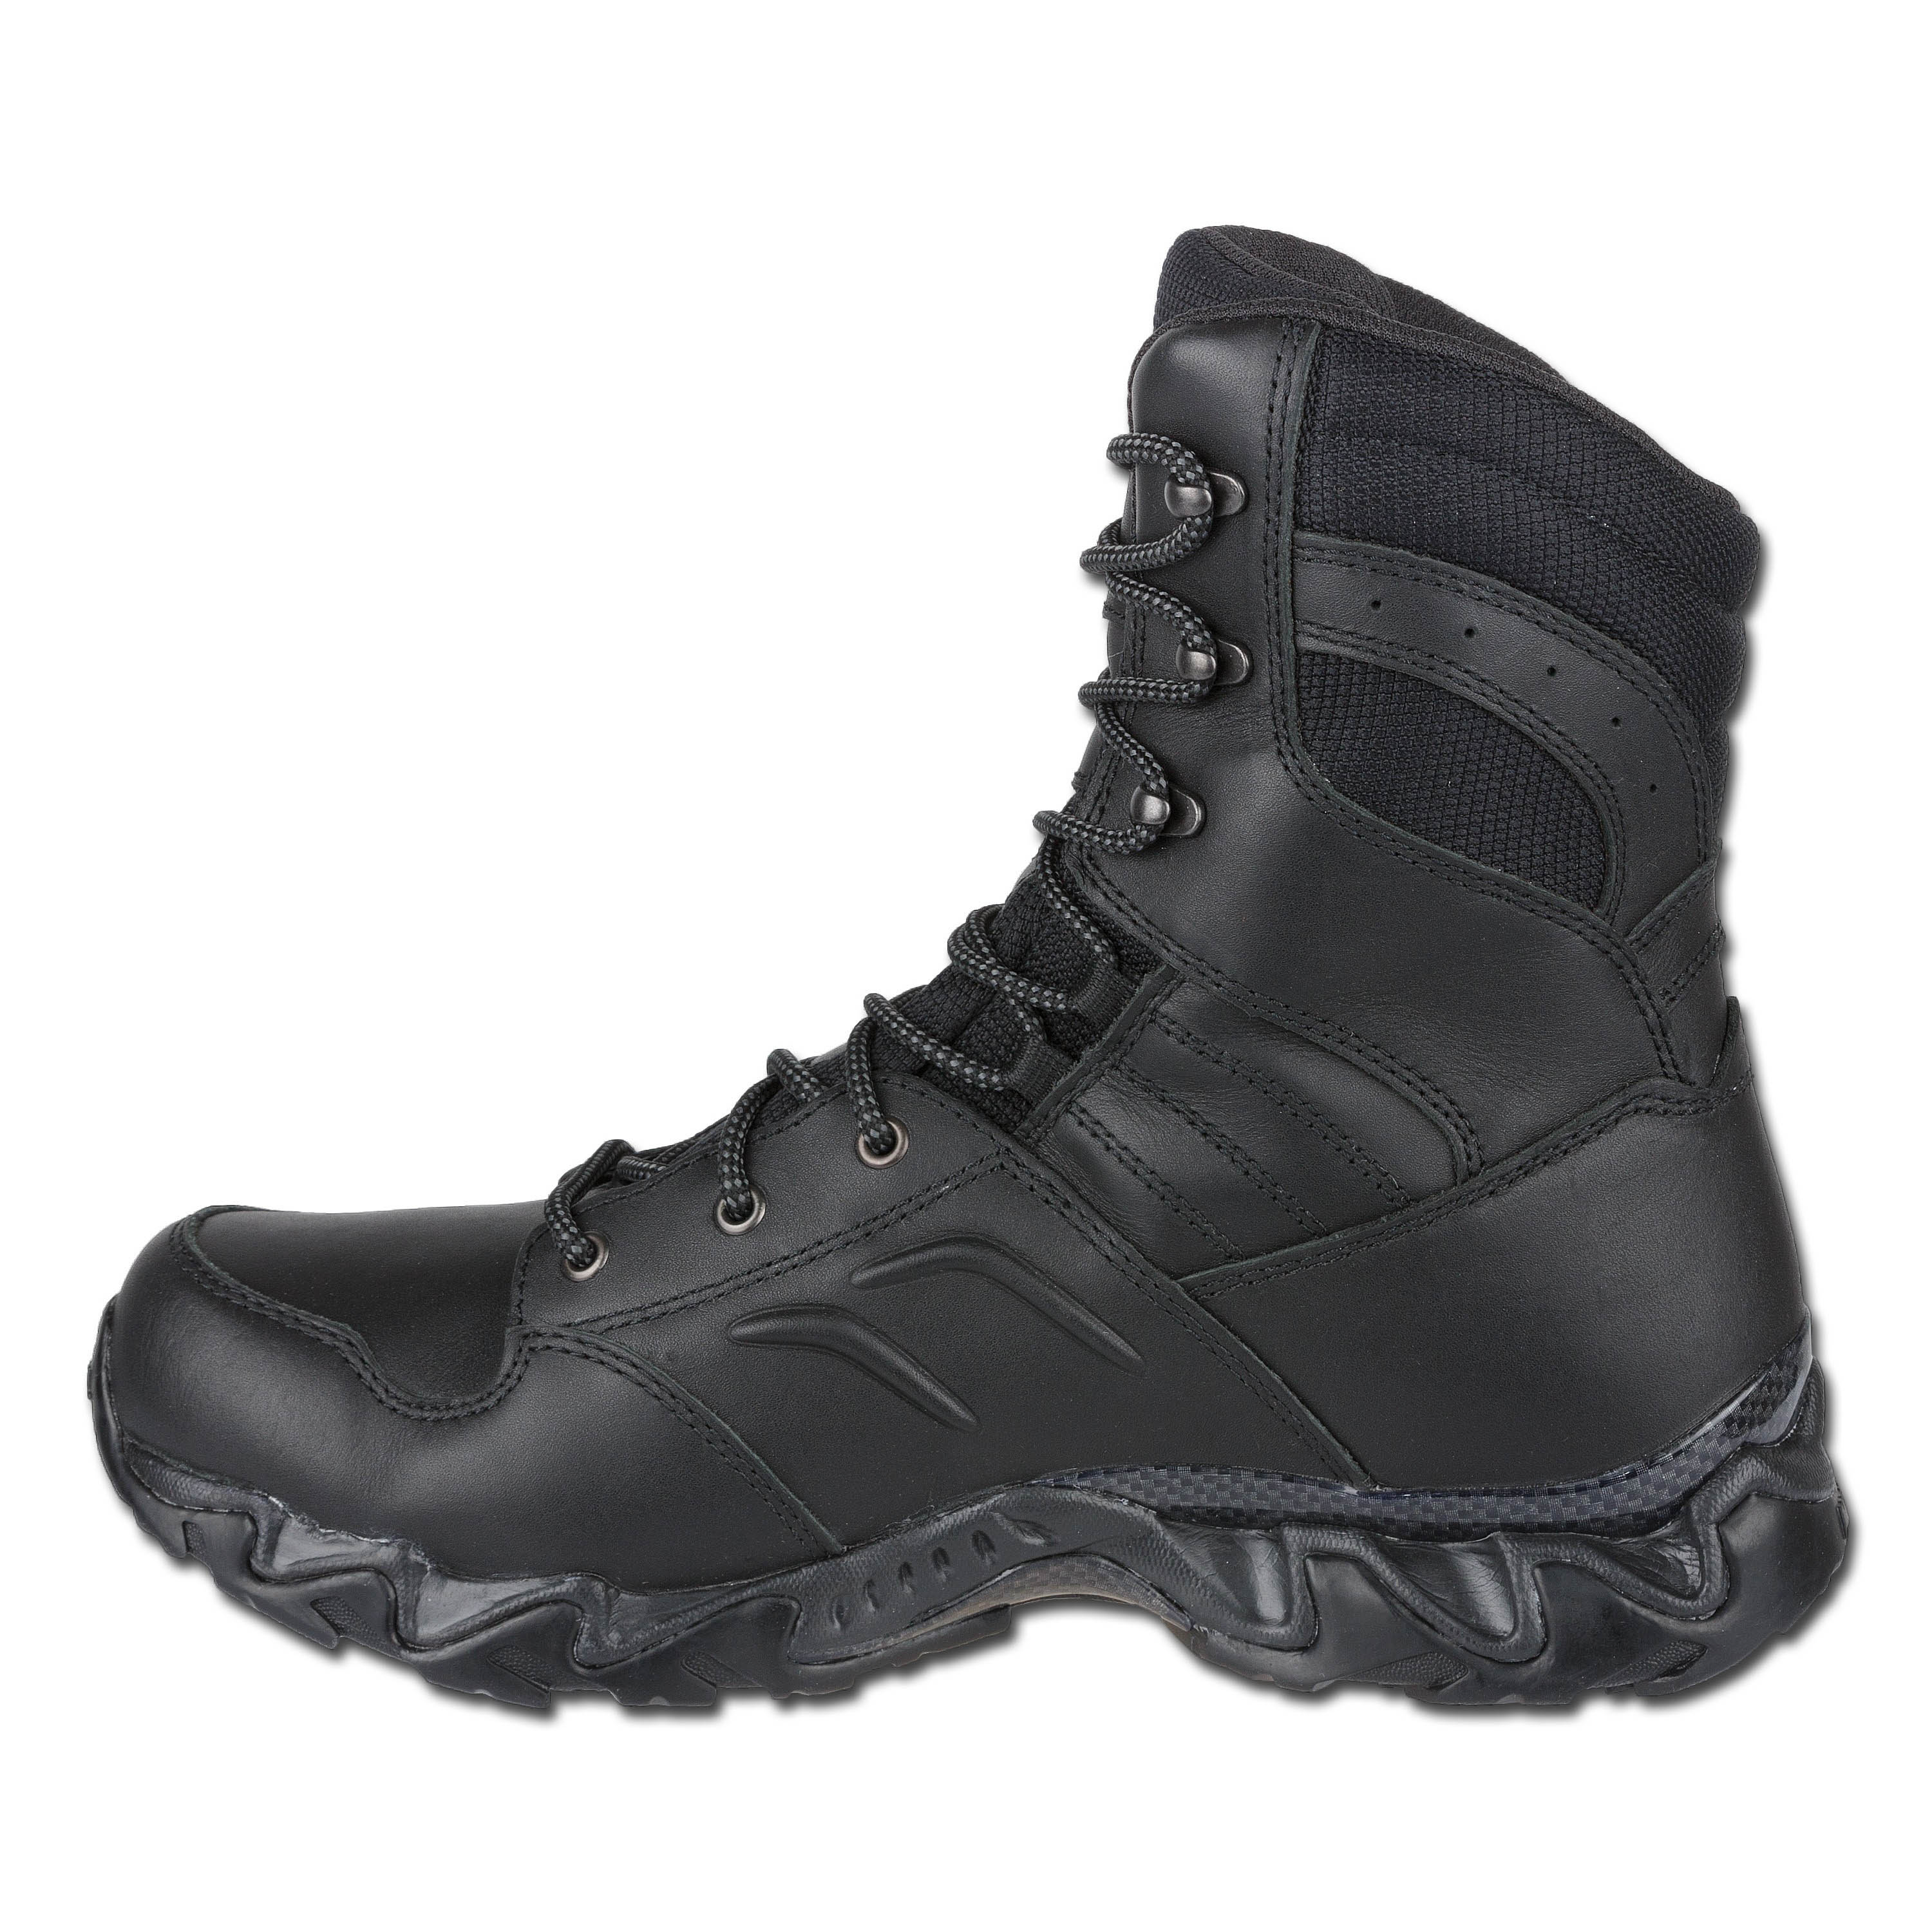 the Meindl Boots Cobra GTX by ASMC